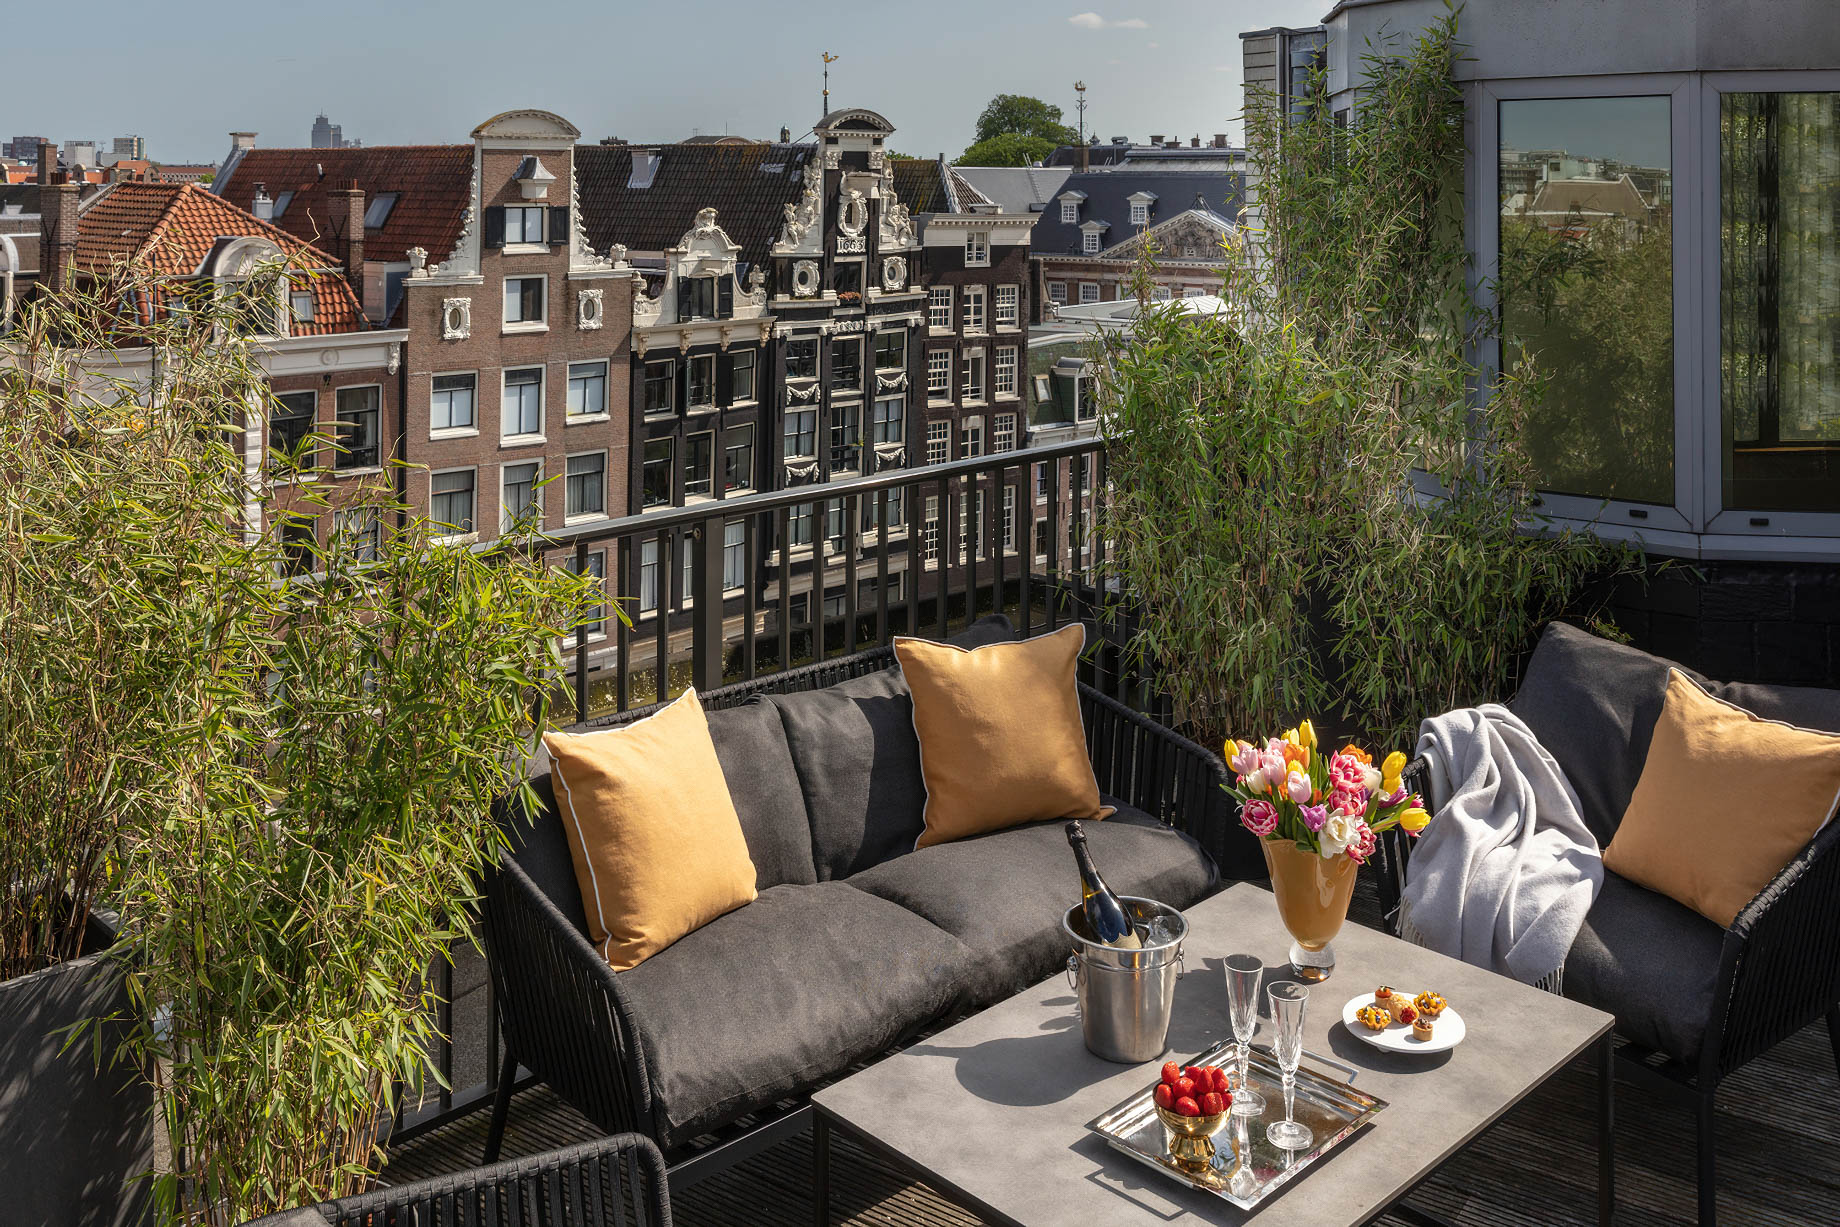 Anantara Grand Hotel Krasnapolsky Amsterdam - Netherlands - Presidential Suite with Rooftop Terrace